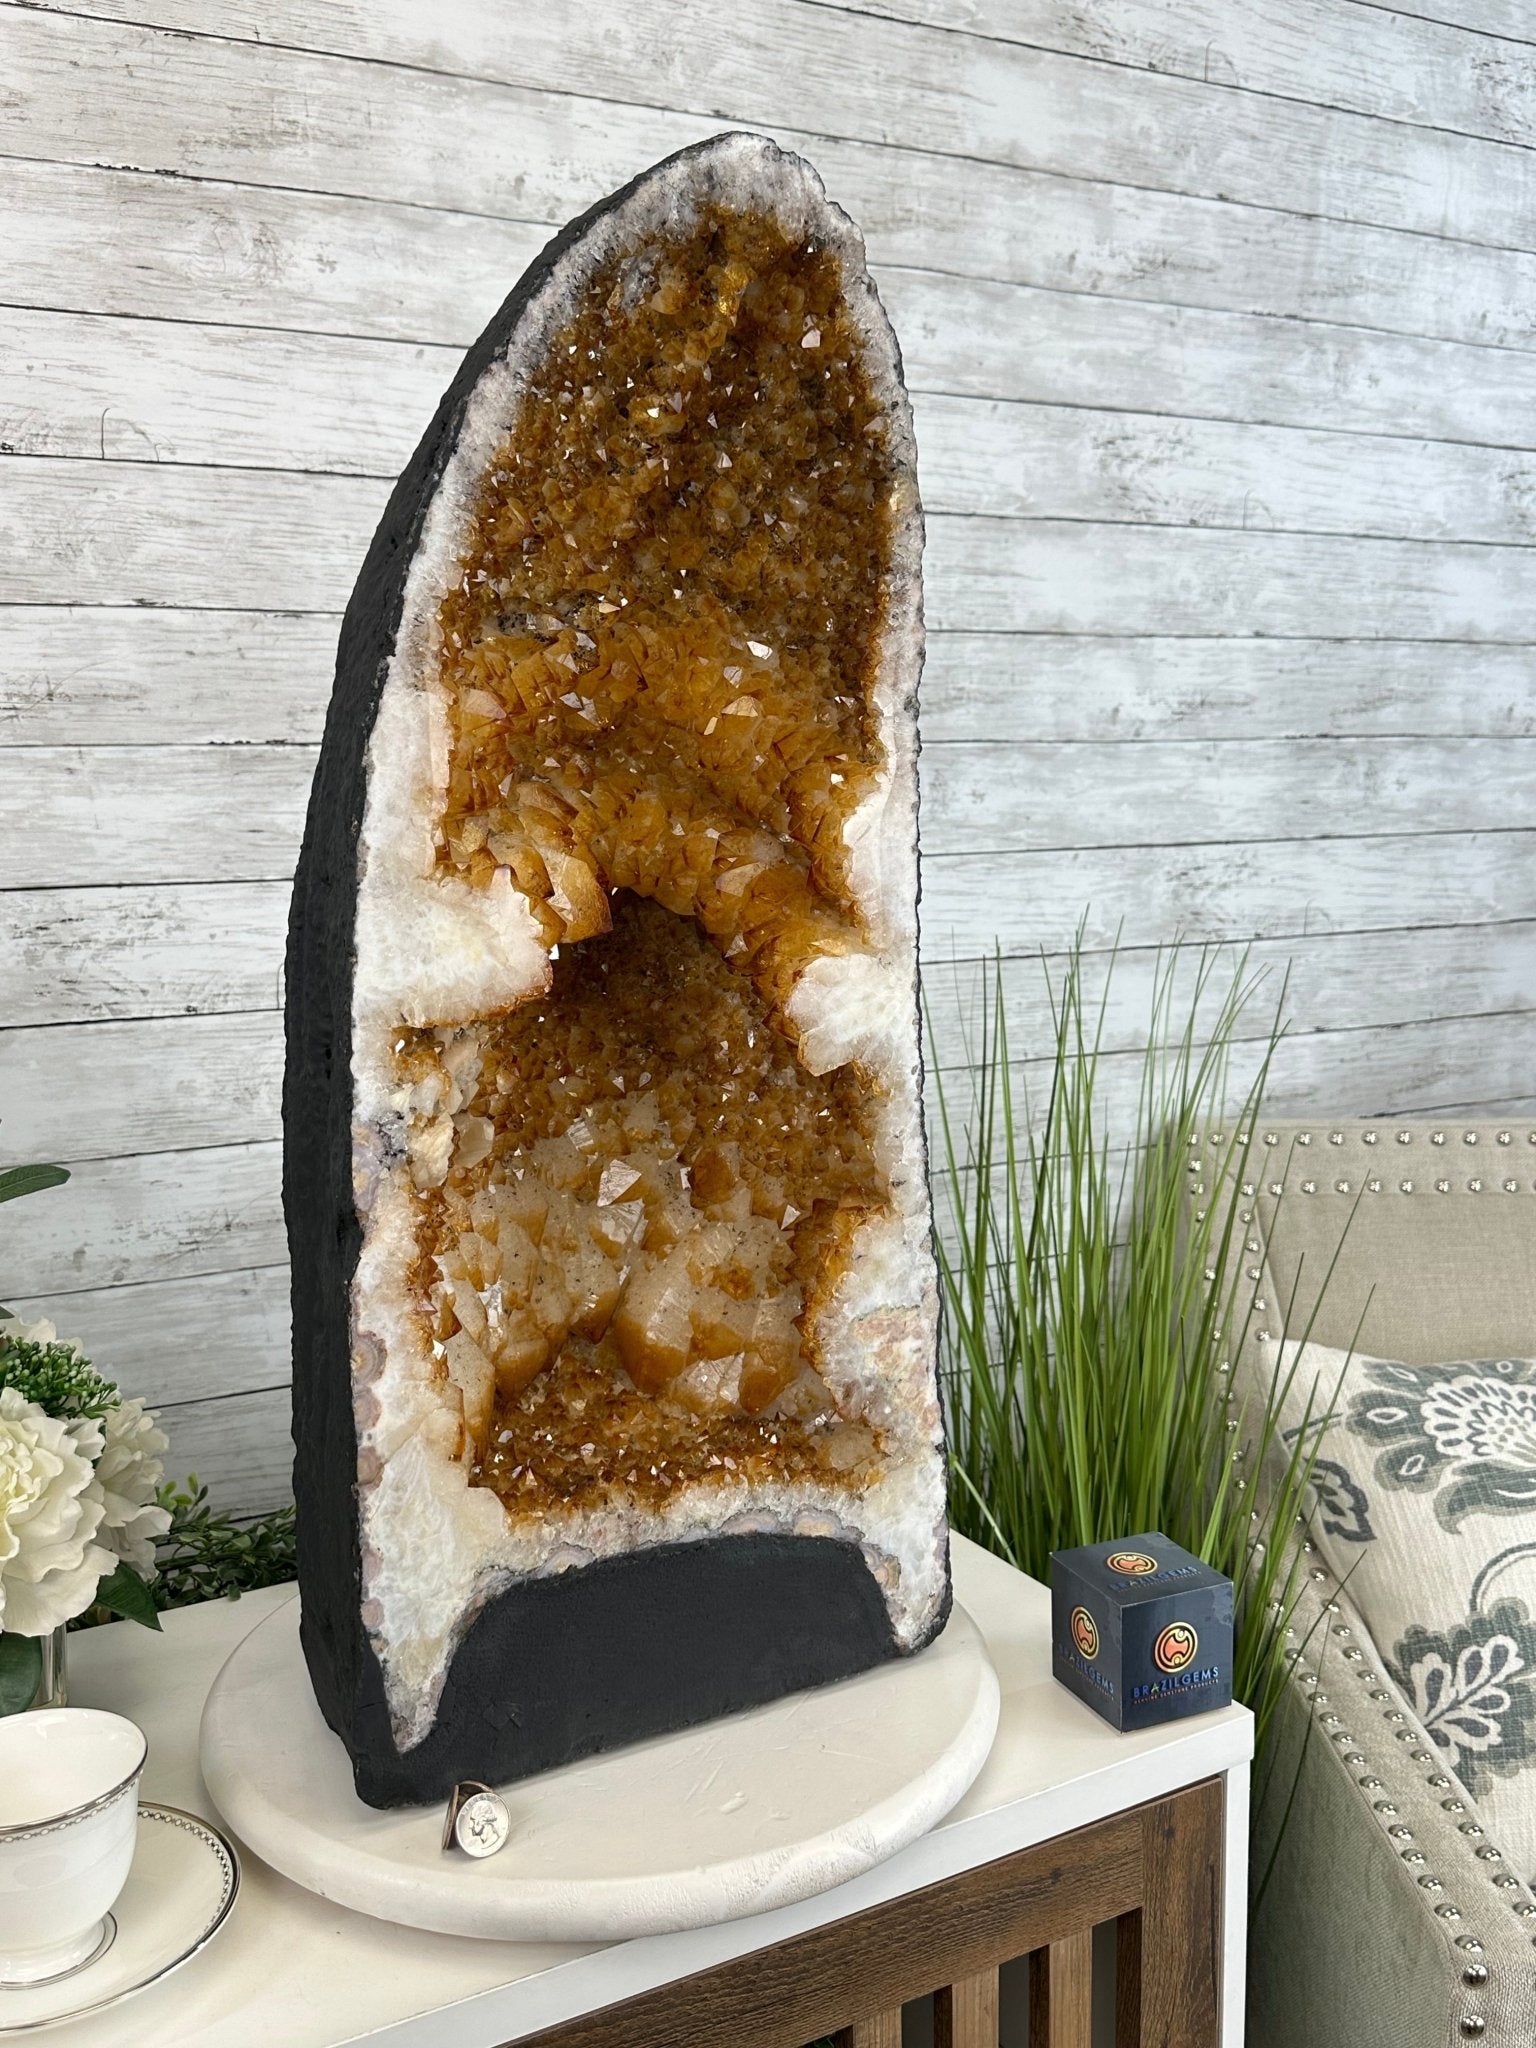 Extra Quality Citrine Cathedral, 103.9 lbs & 26.5" Tall #5603-0309 by Brazil Gems® - Brazil GemsBrazil GemsExtra Quality Citrine Cathedral, 103.9 lbs & 26.5" Tall #5603-0309 by Brazil Gems®Cathedrals5603-0309